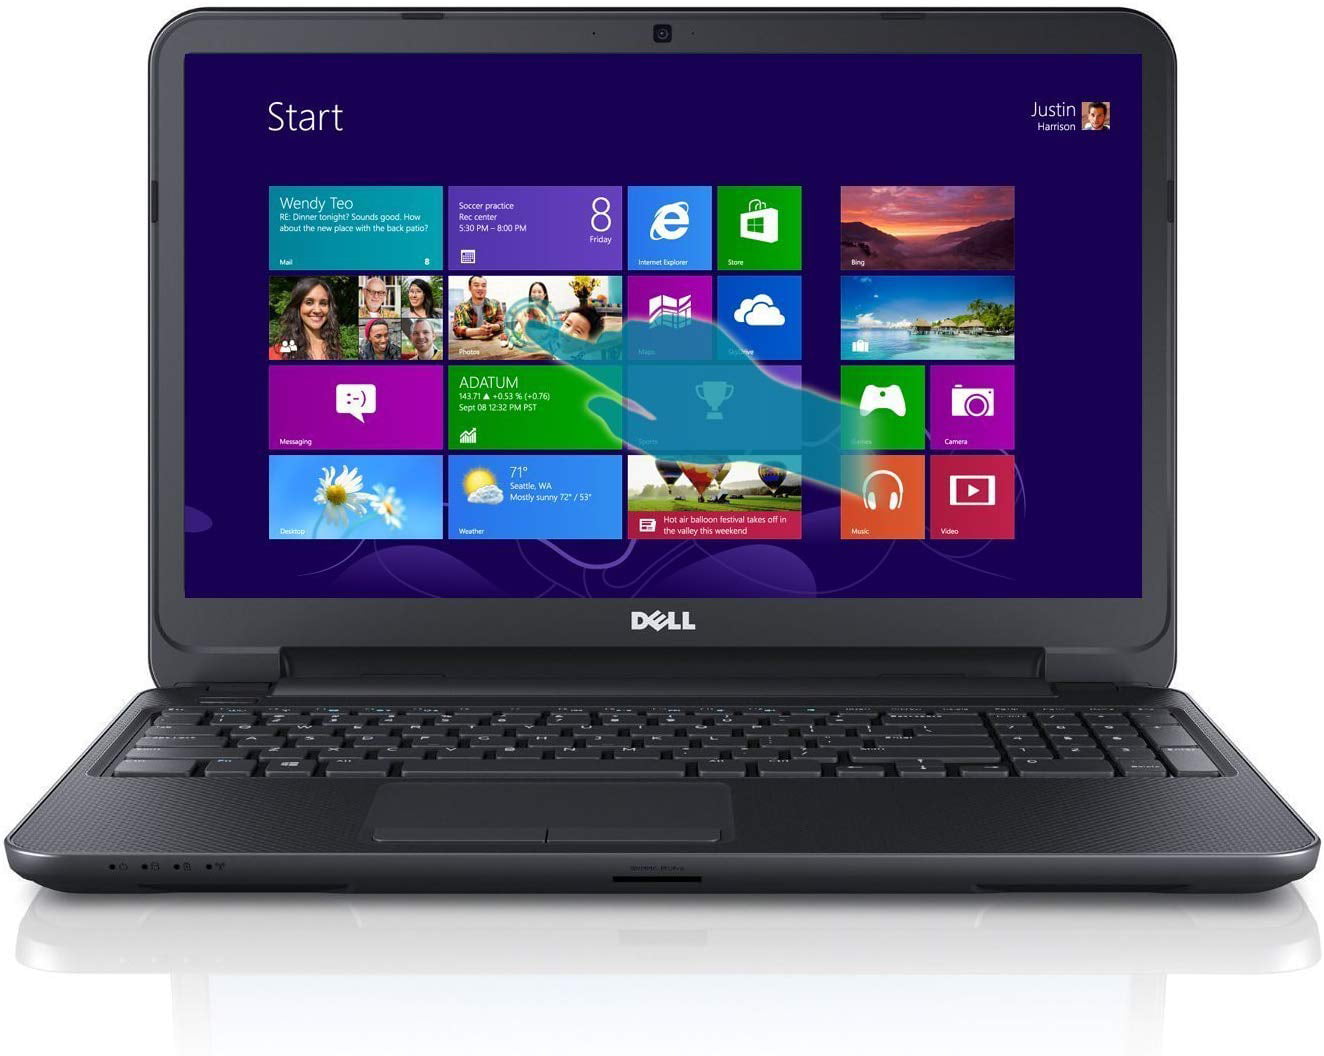 Dell Inspiron 15 5000 Series 15.6-Inch Touchscreen ...